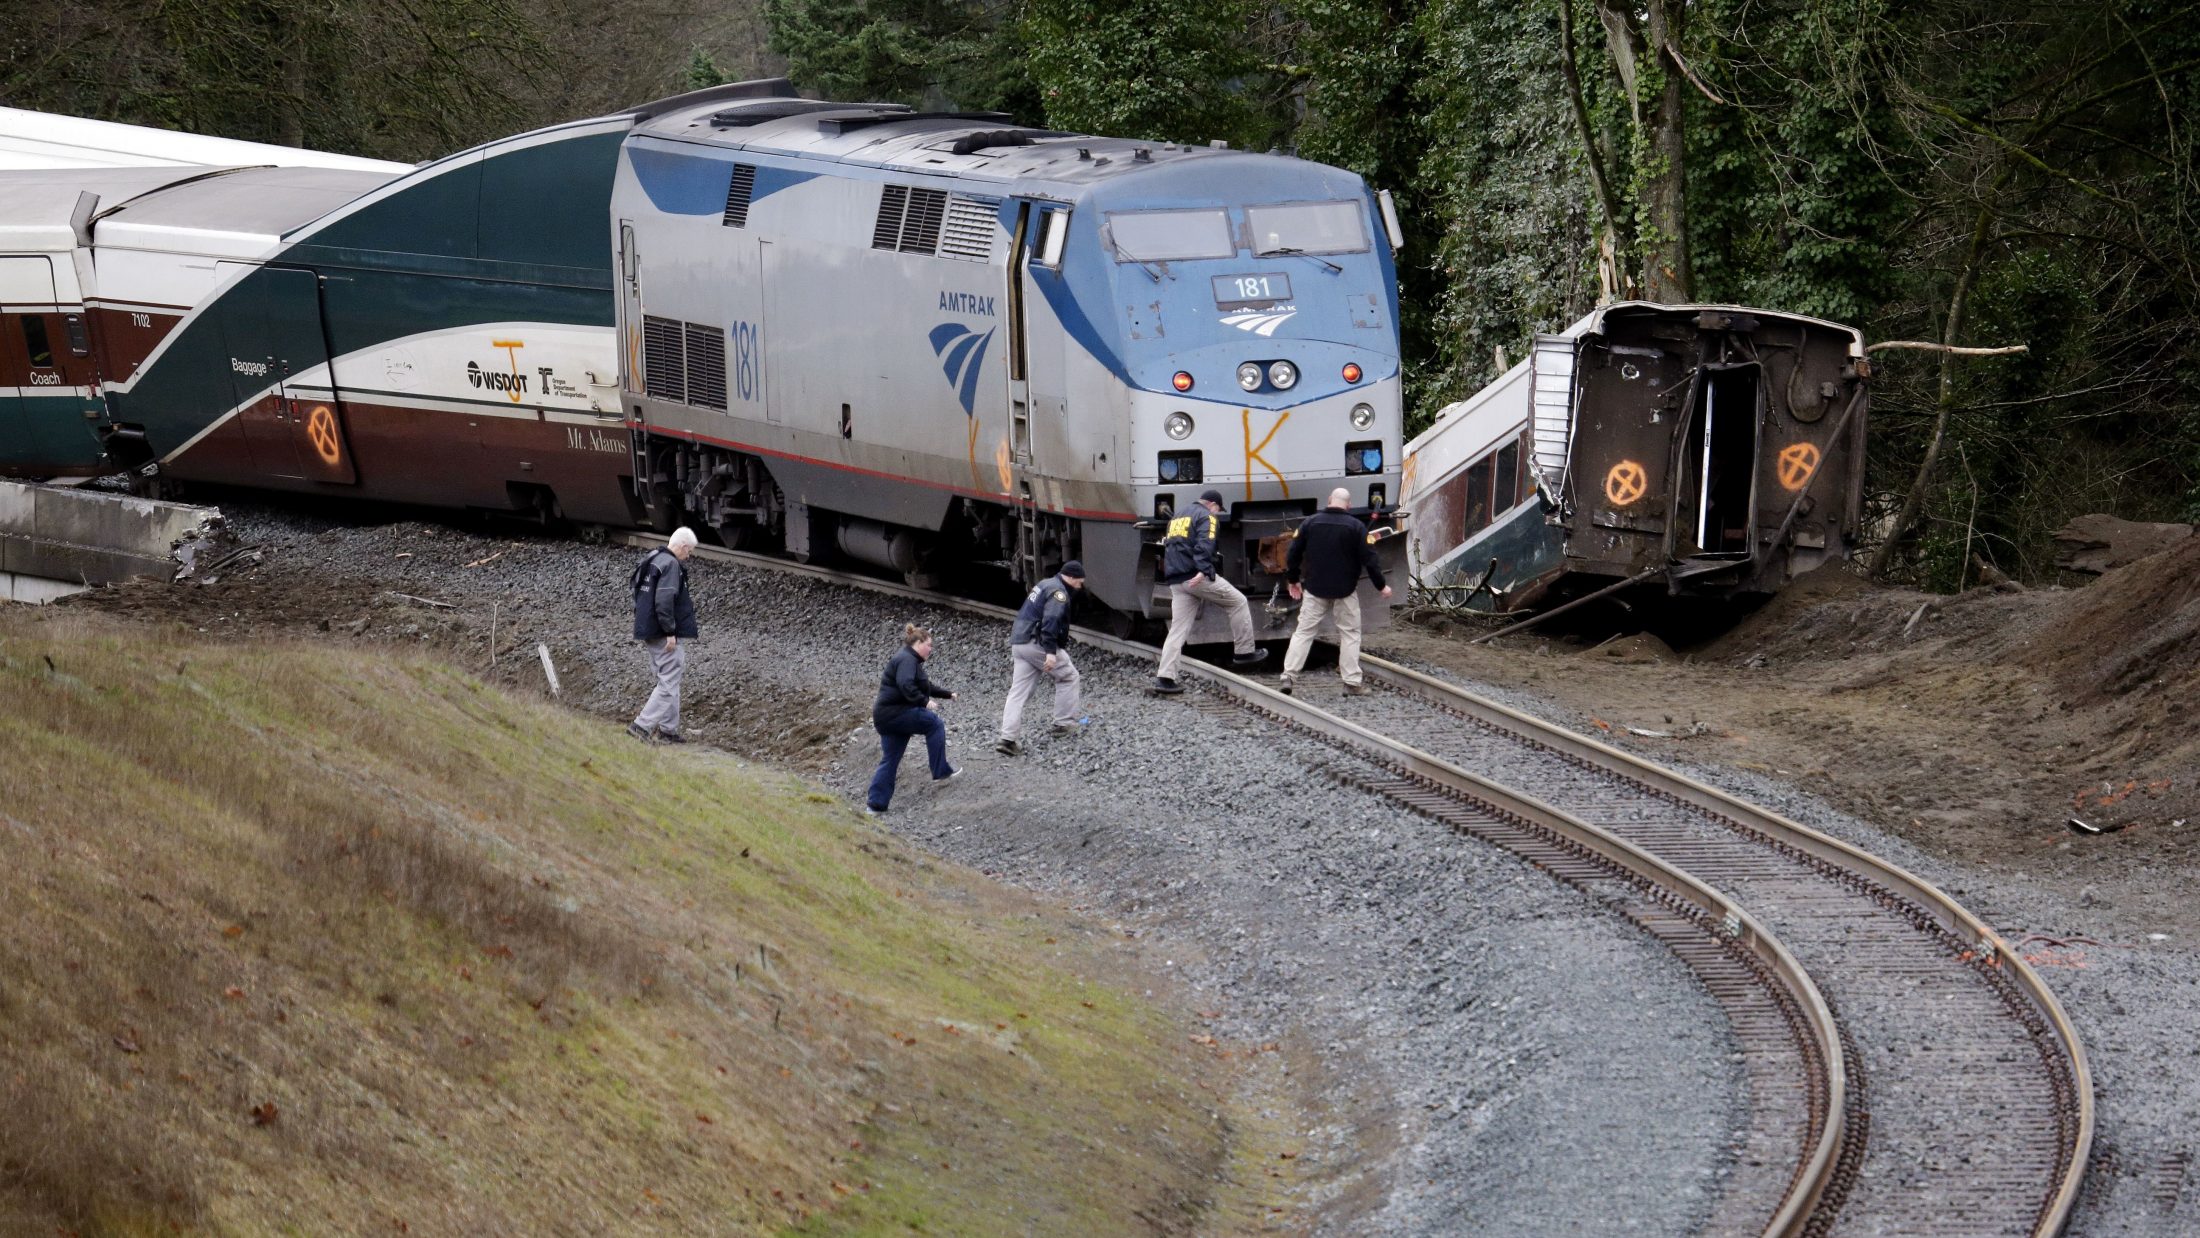 We open with updates on the terrible amtrack accident in washington state.